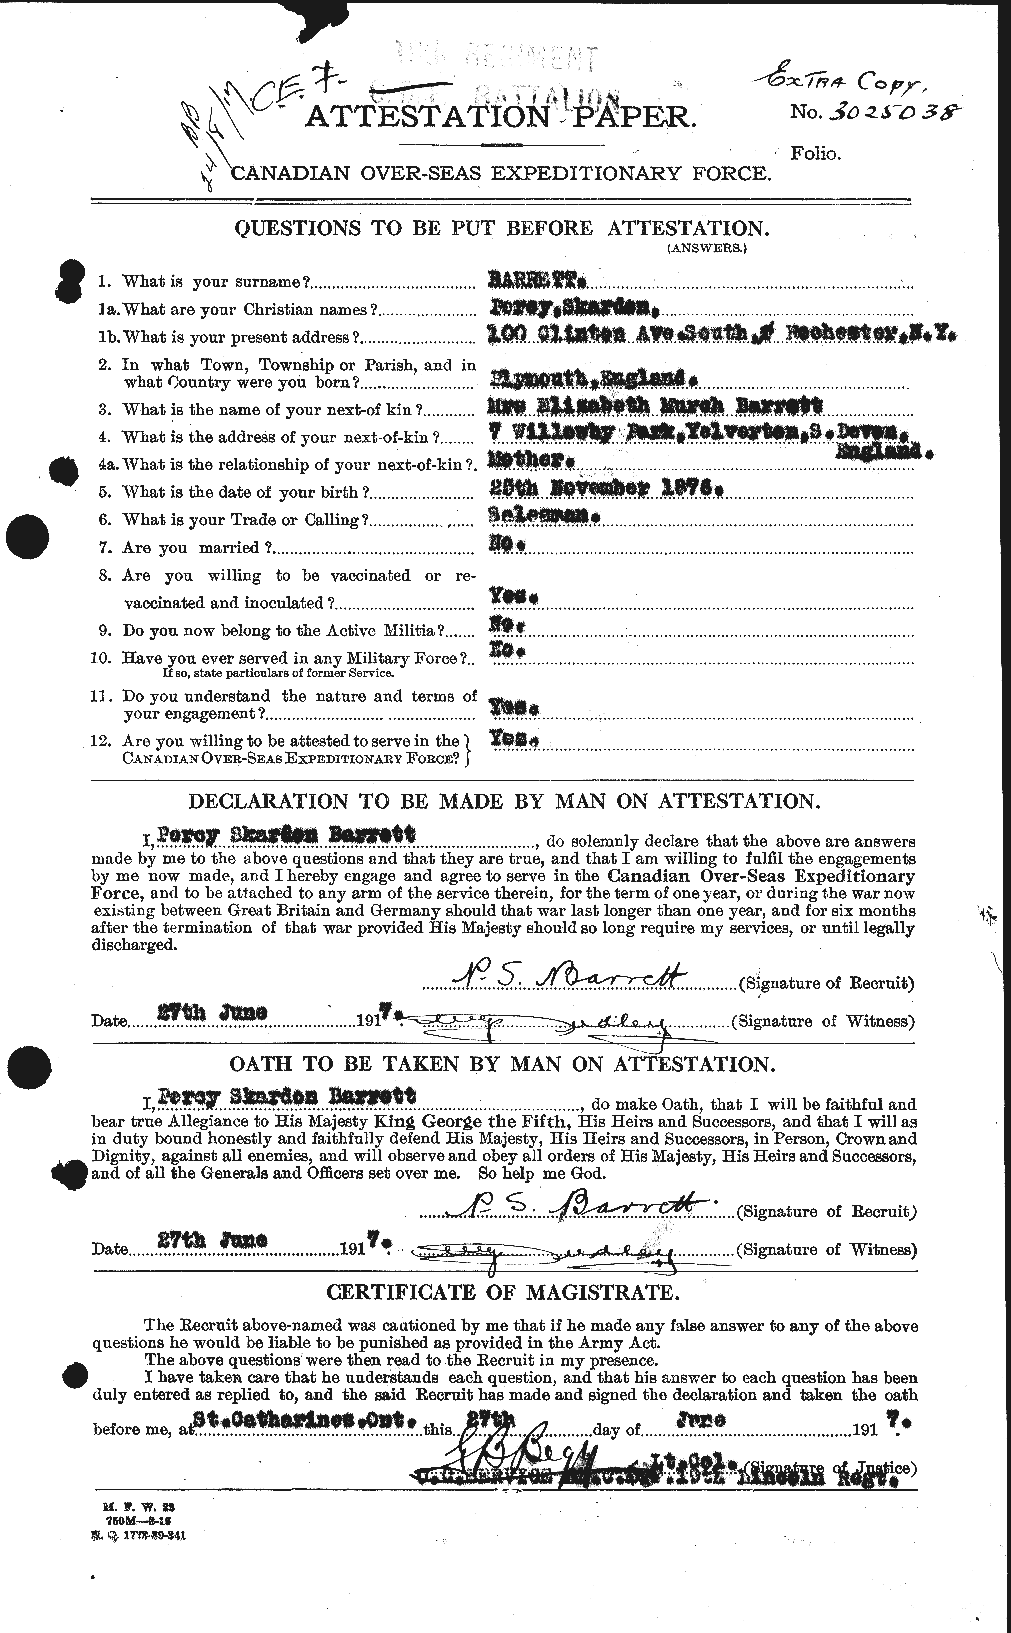 Personnel Records of the First World War - CEF 220205a